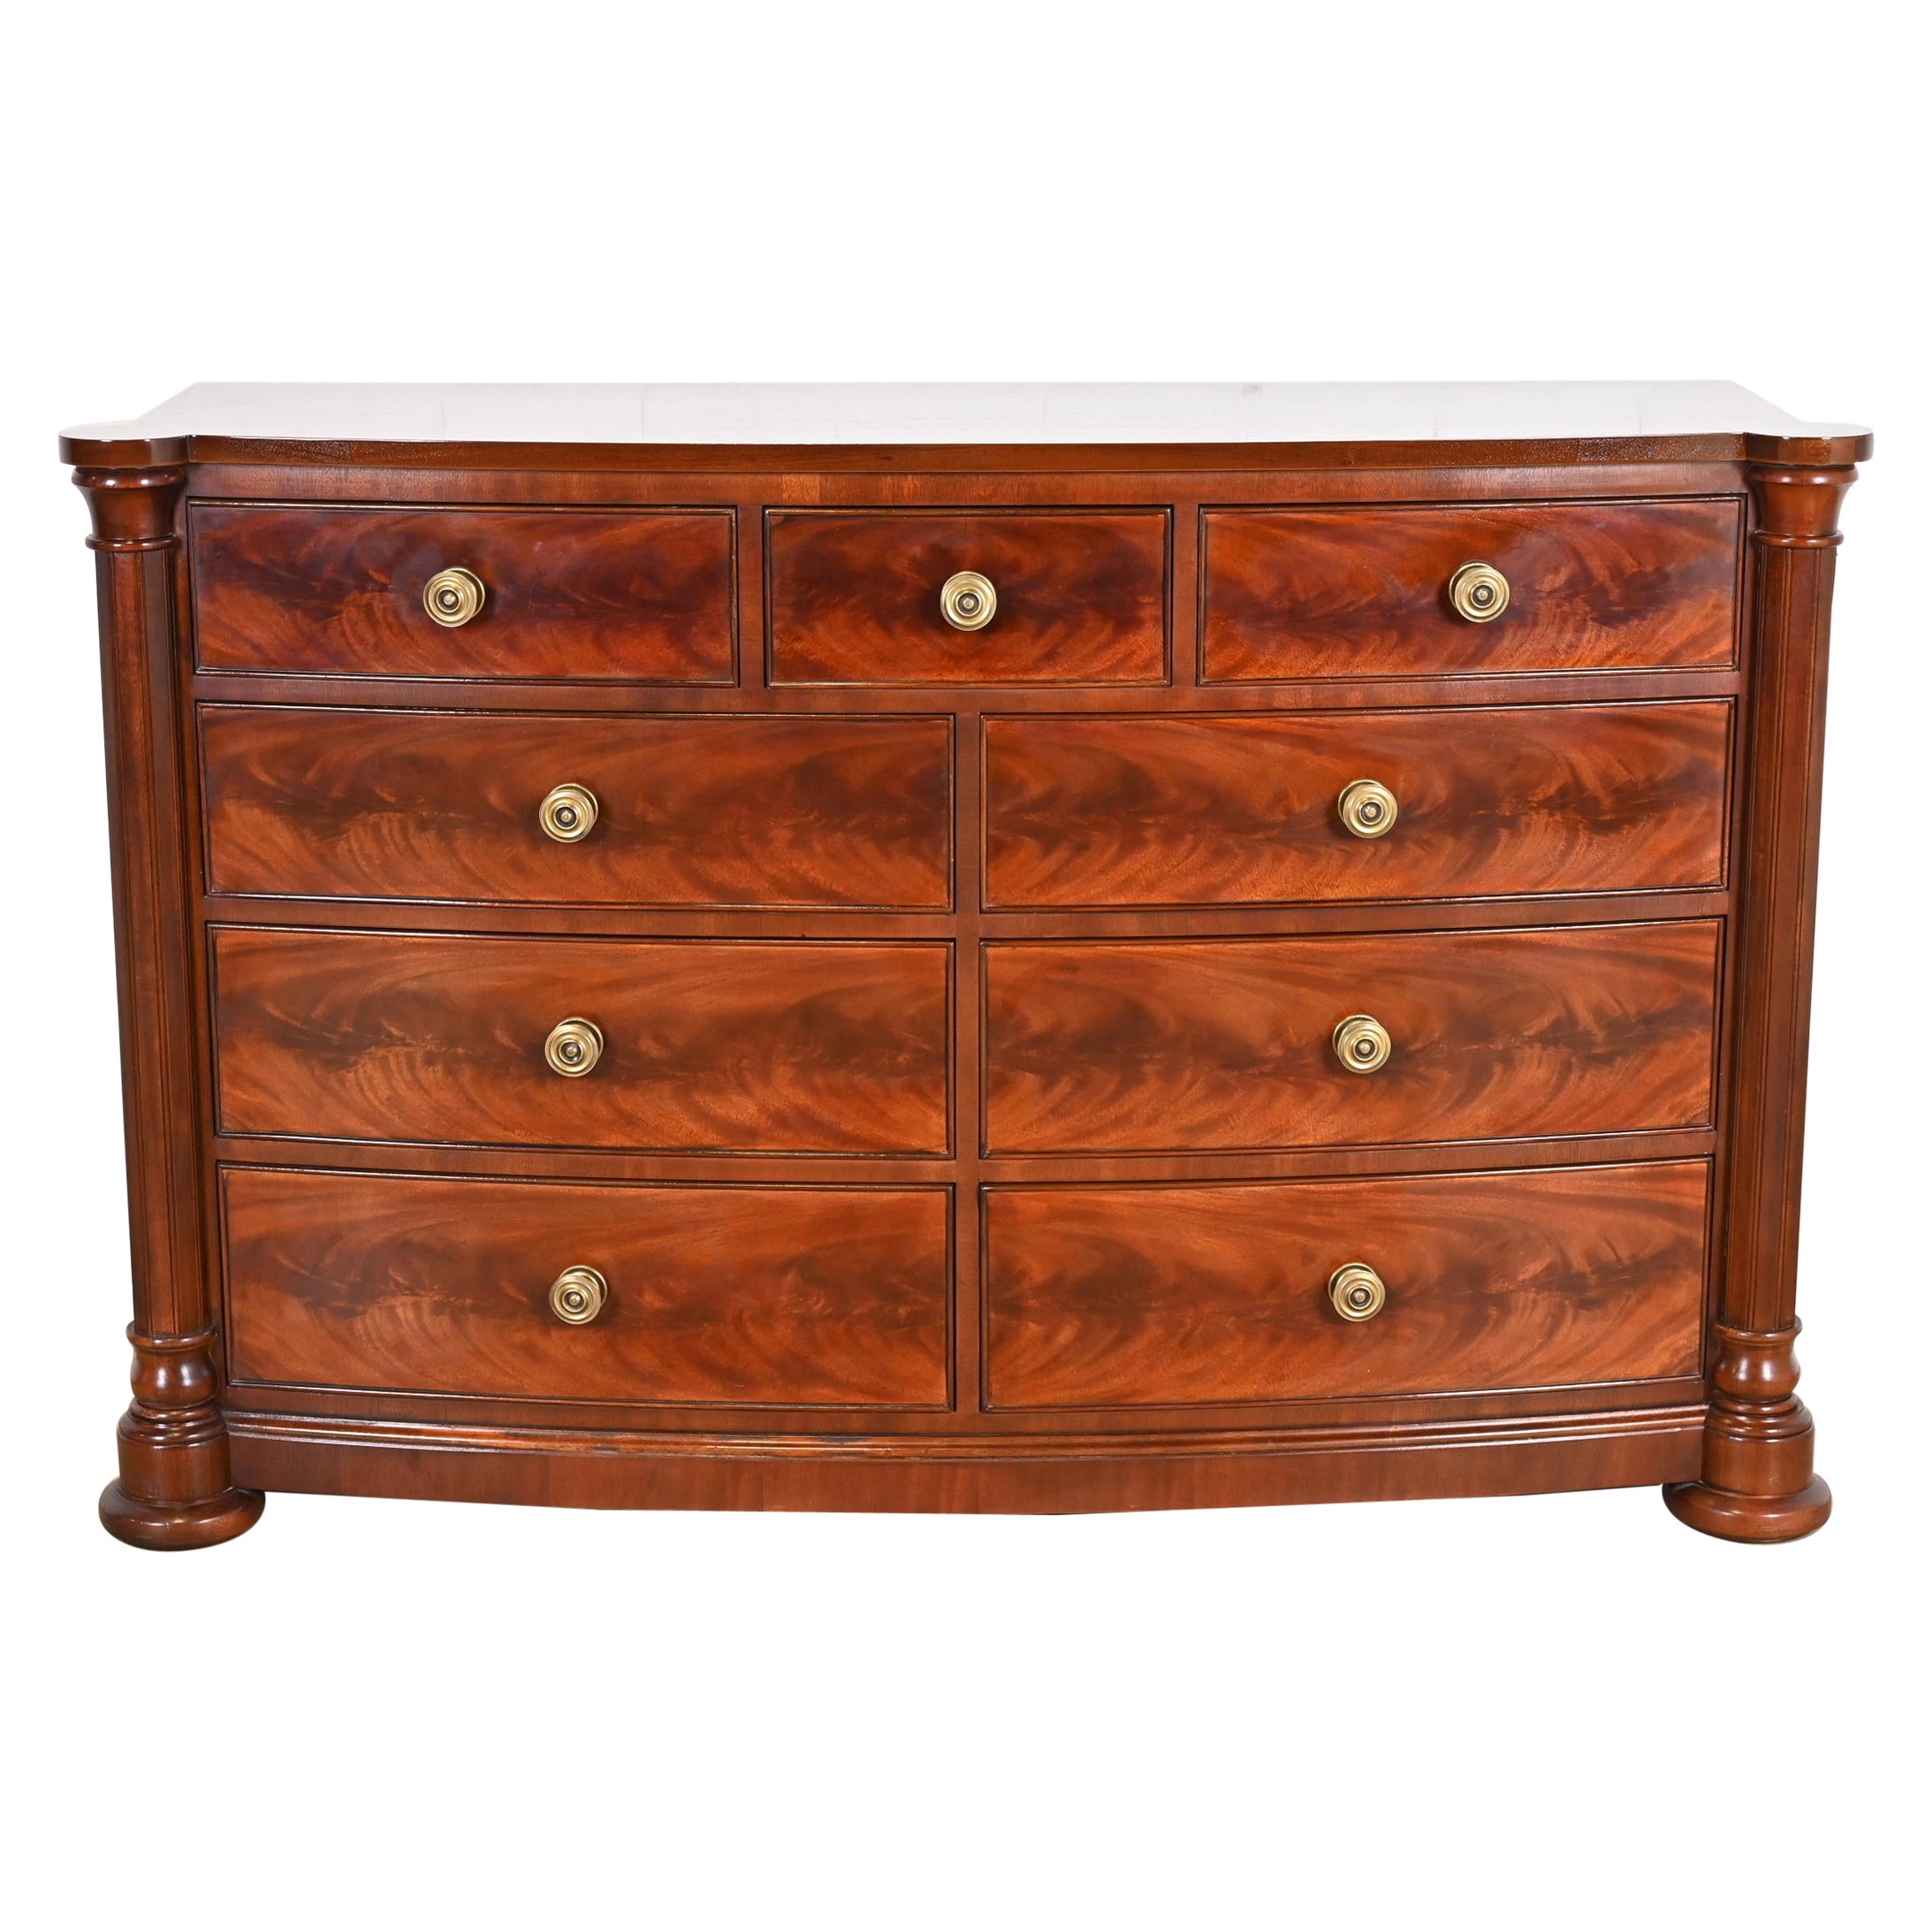 Henredon Empire Flame Mahogany Bow Front Chest of Drawers